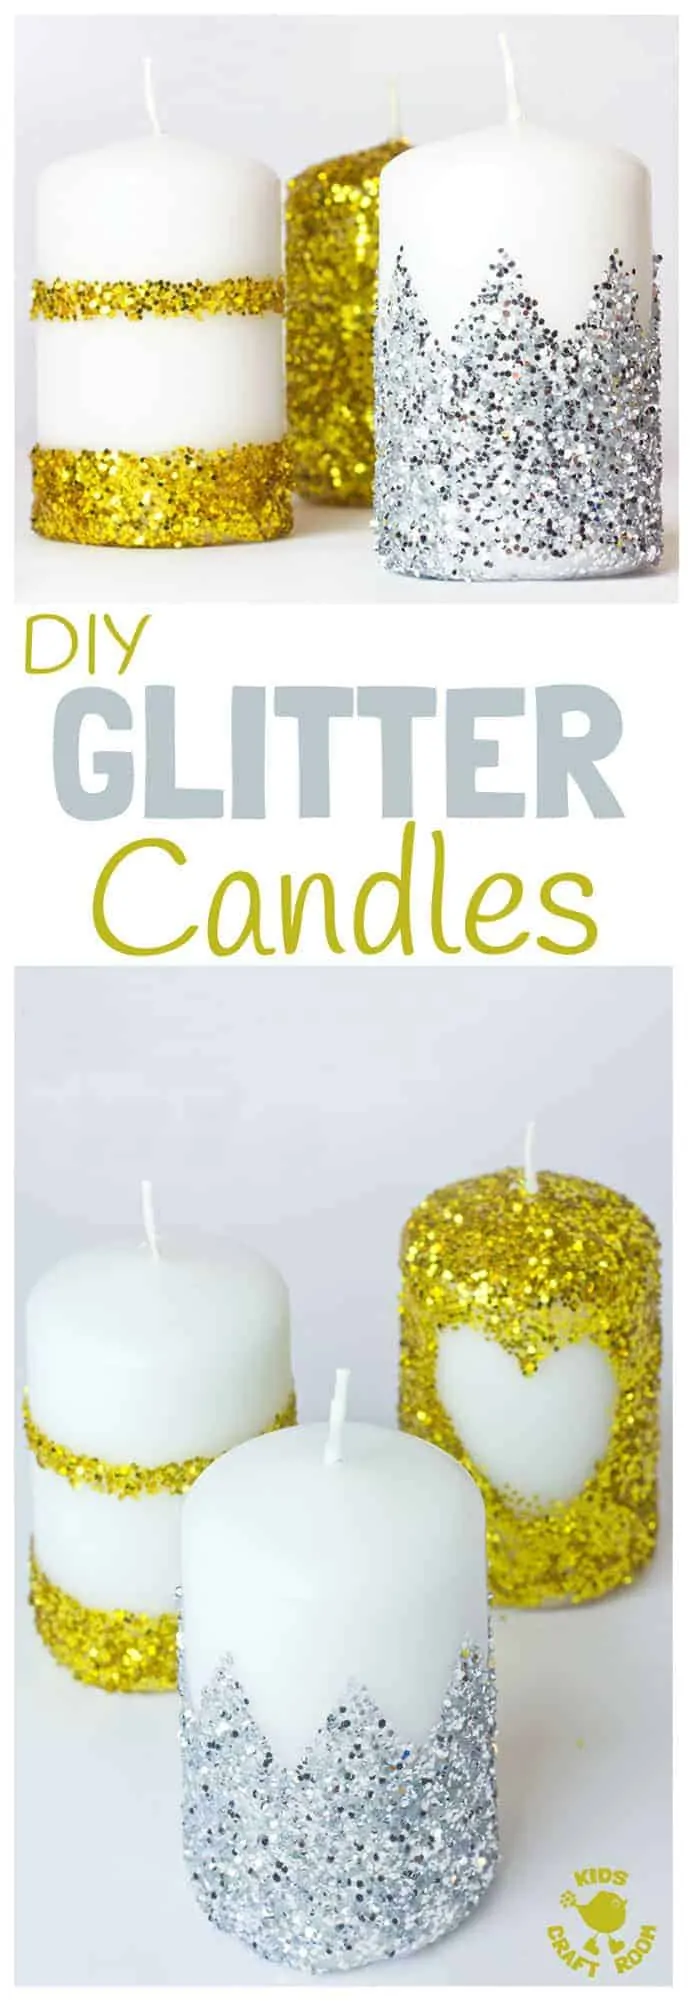 How To Make Glitter Candles at Home in 8 Easy Steps [DIY Tutorial